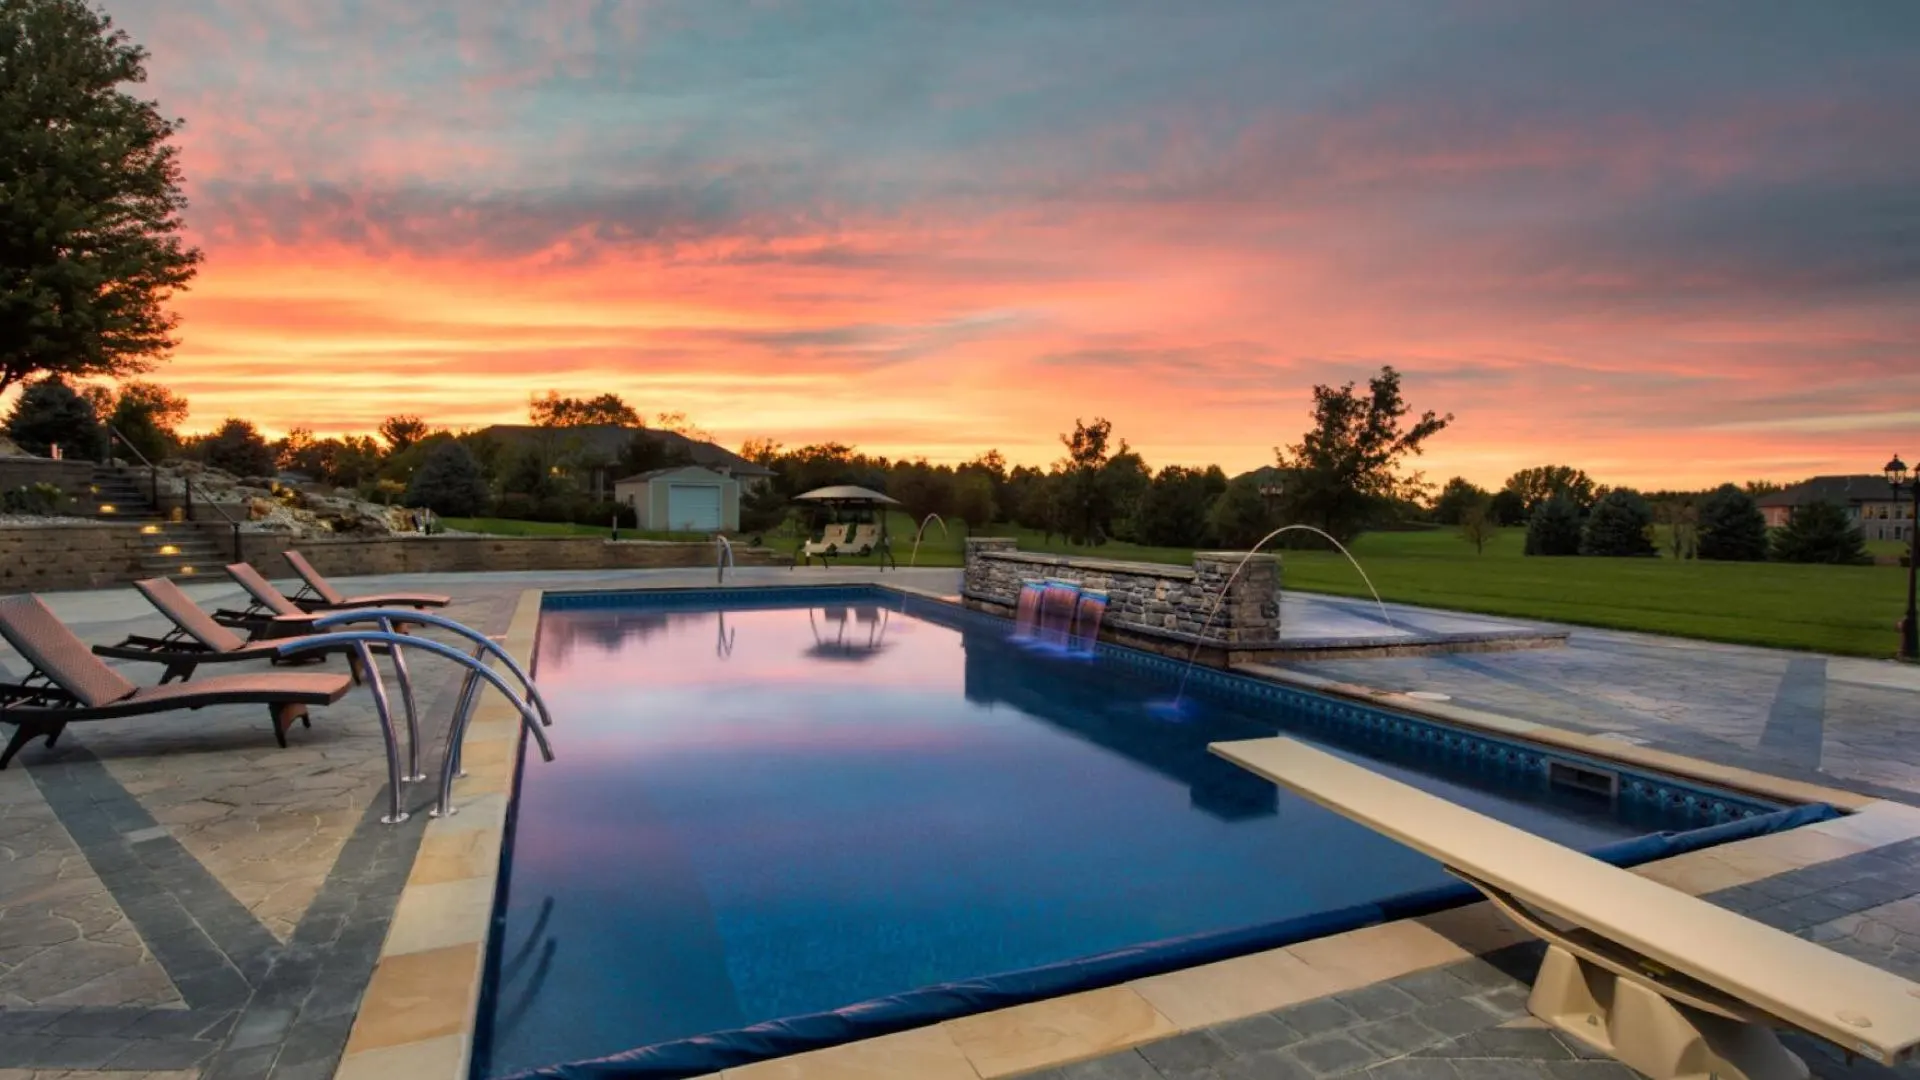 Upgrade Your Swimming Pool With These Must-Have Features